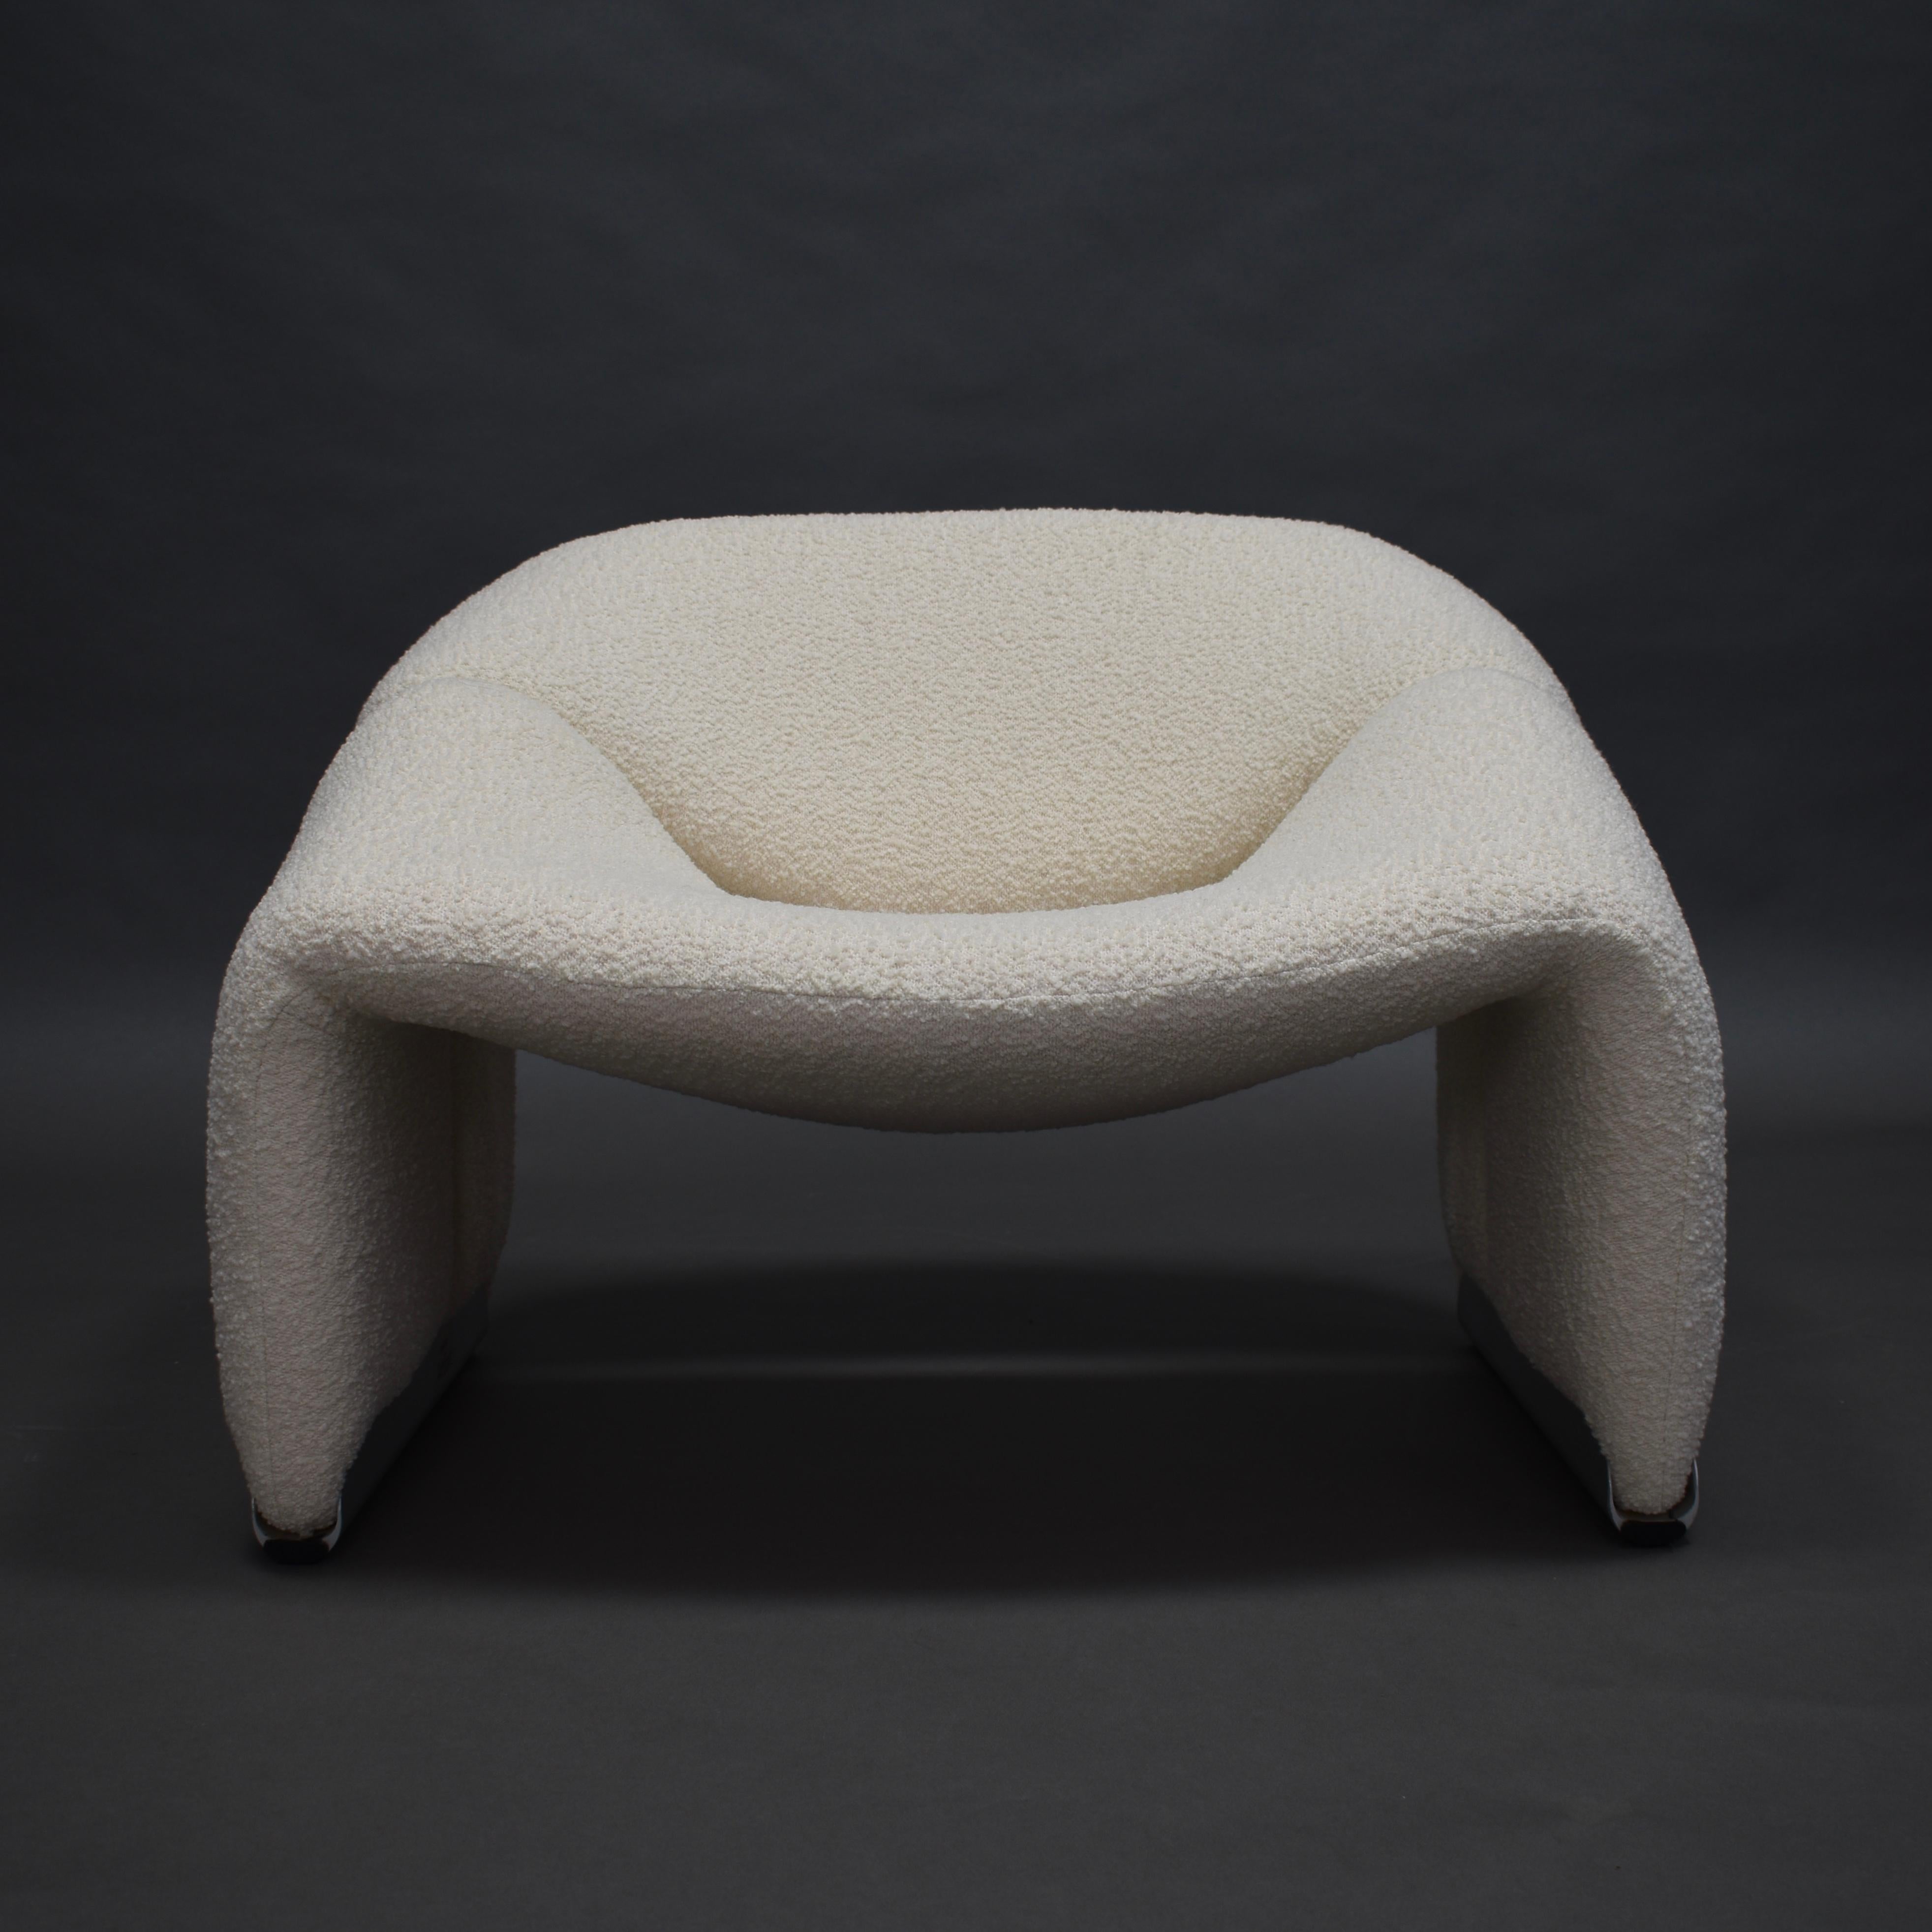 ‘Groovy’ F598 lounge chair by Pierre Paulin for Artifort, Netherlands, 1972.

The chair has been reupholstered in a beautiful off-white bouclé wool/cotton fabric by Bisson Bruneel, (France). 

Designer: Pierre Paulin

Manufacturer: